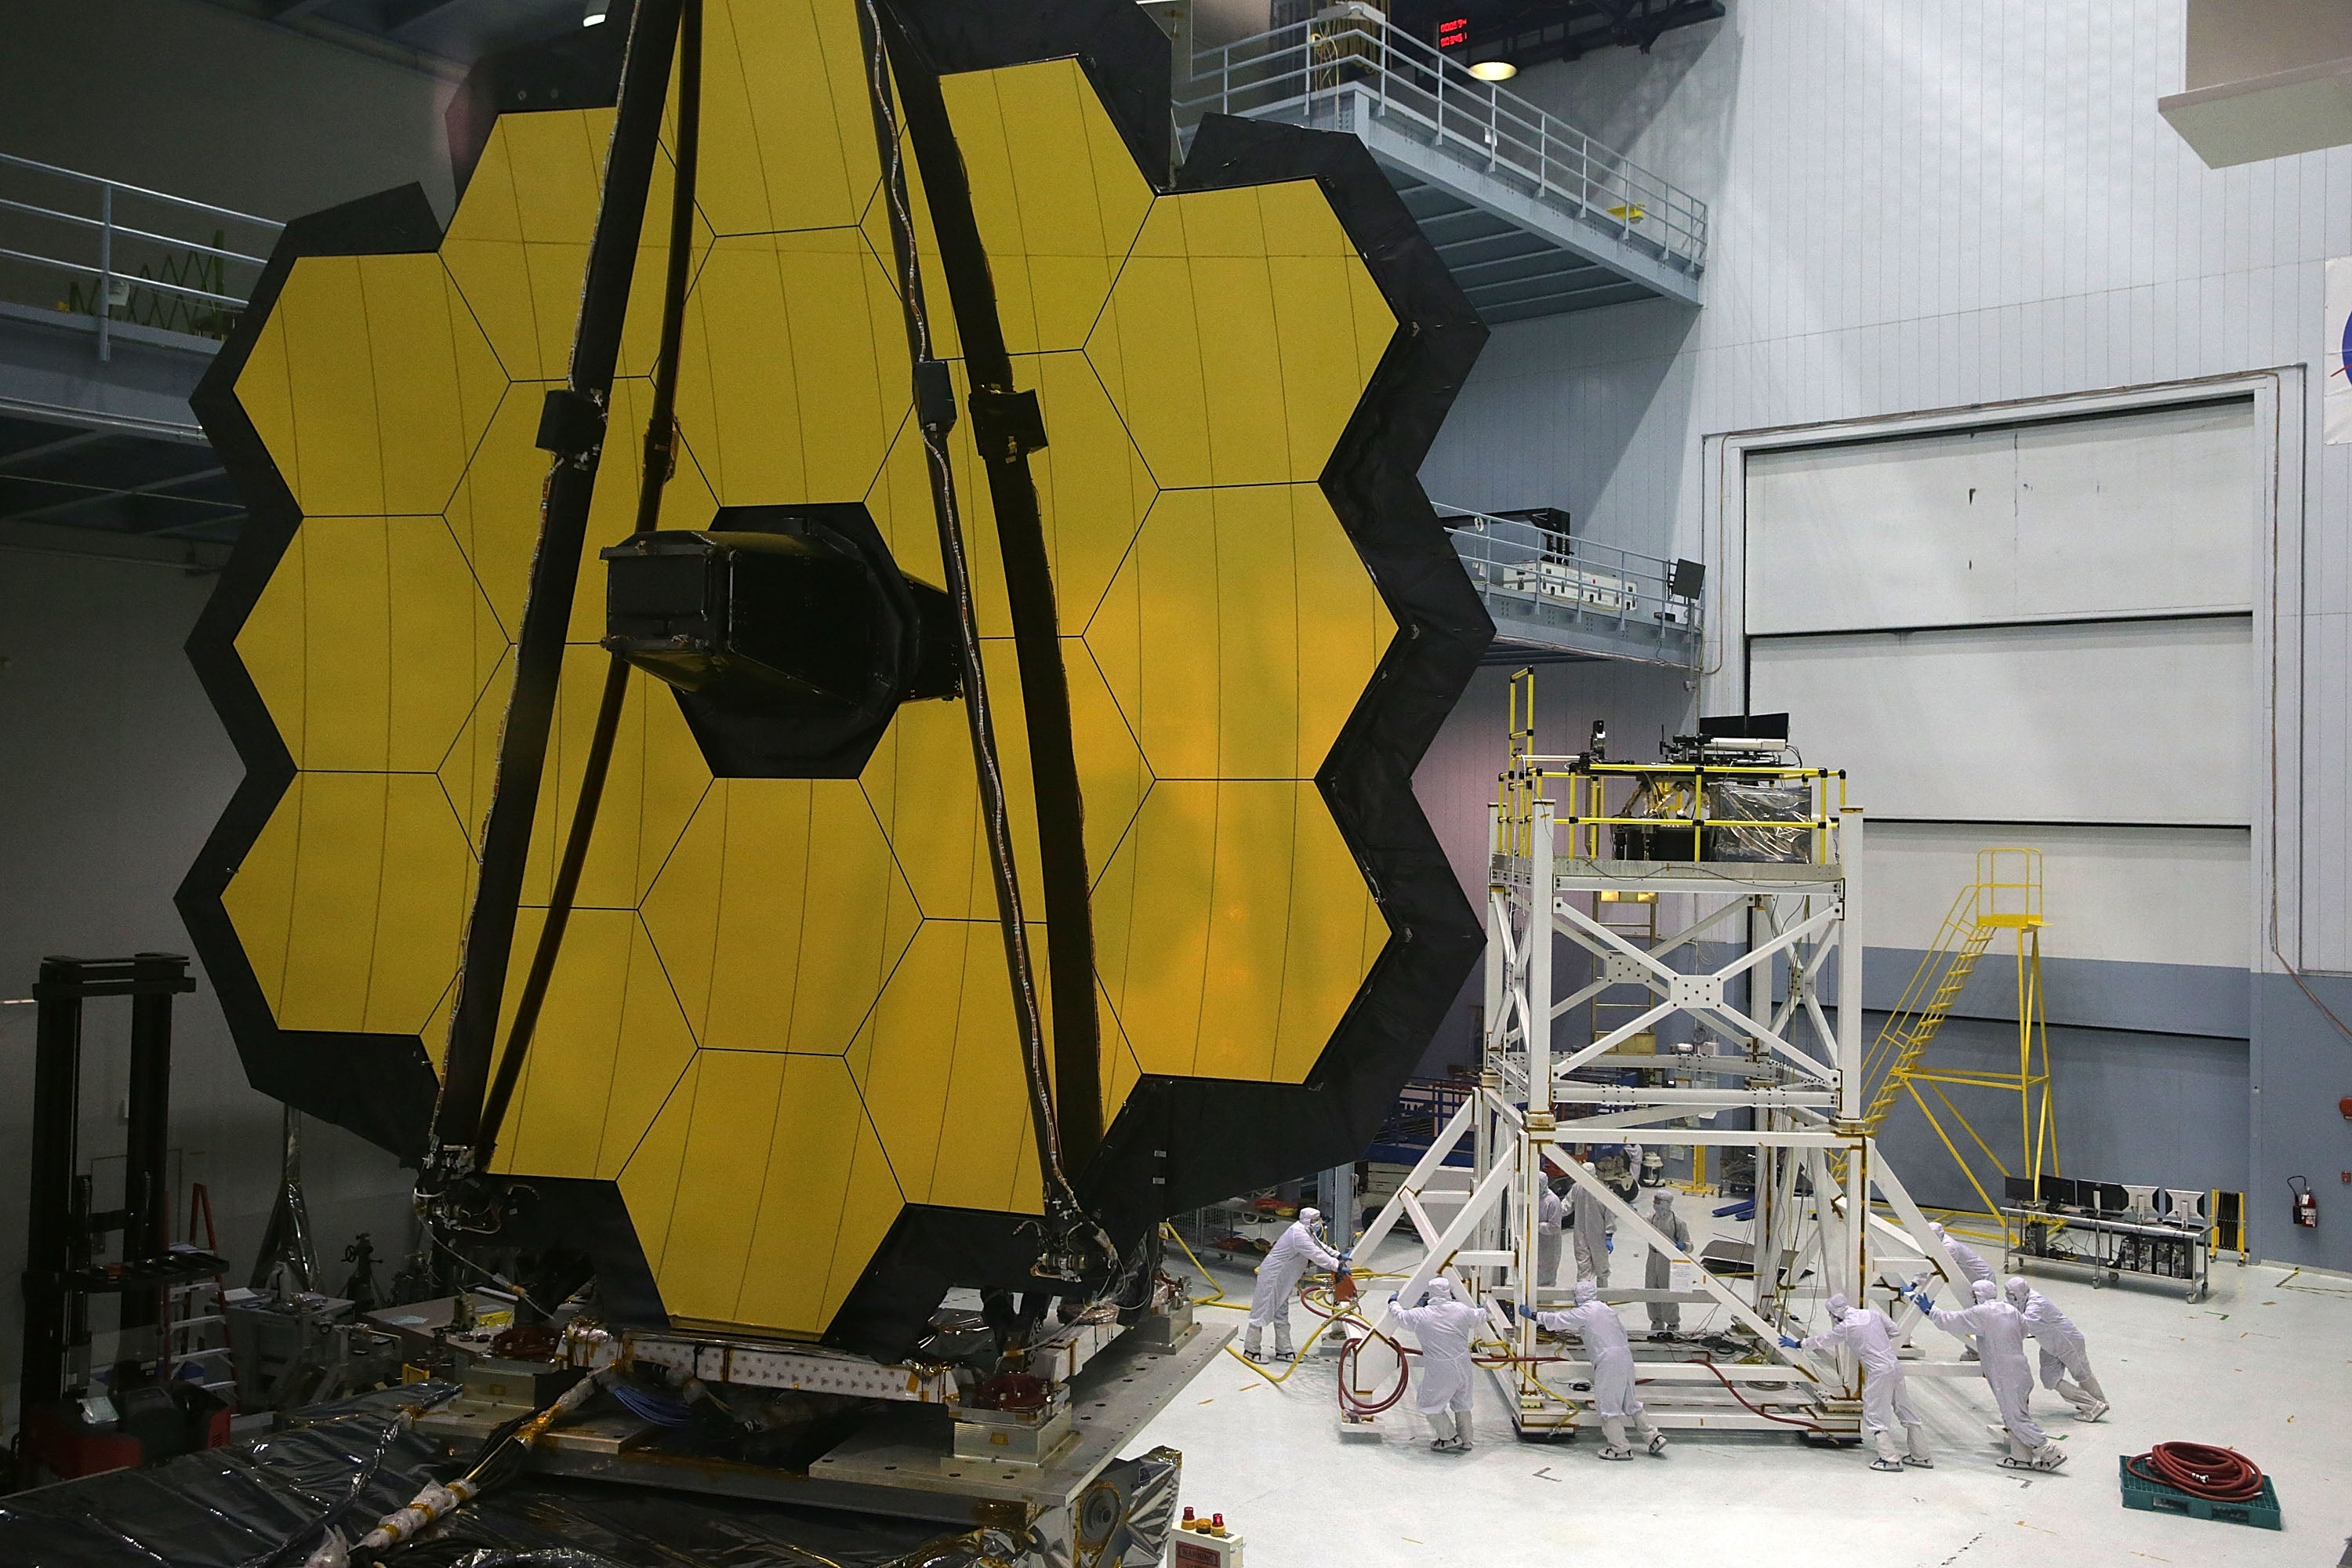 Engineers and technicians assemble the James Webb Space Telescope November 2, 2016 at NASA’s Goddard Space Flight Center in Greenbelt, Maryland